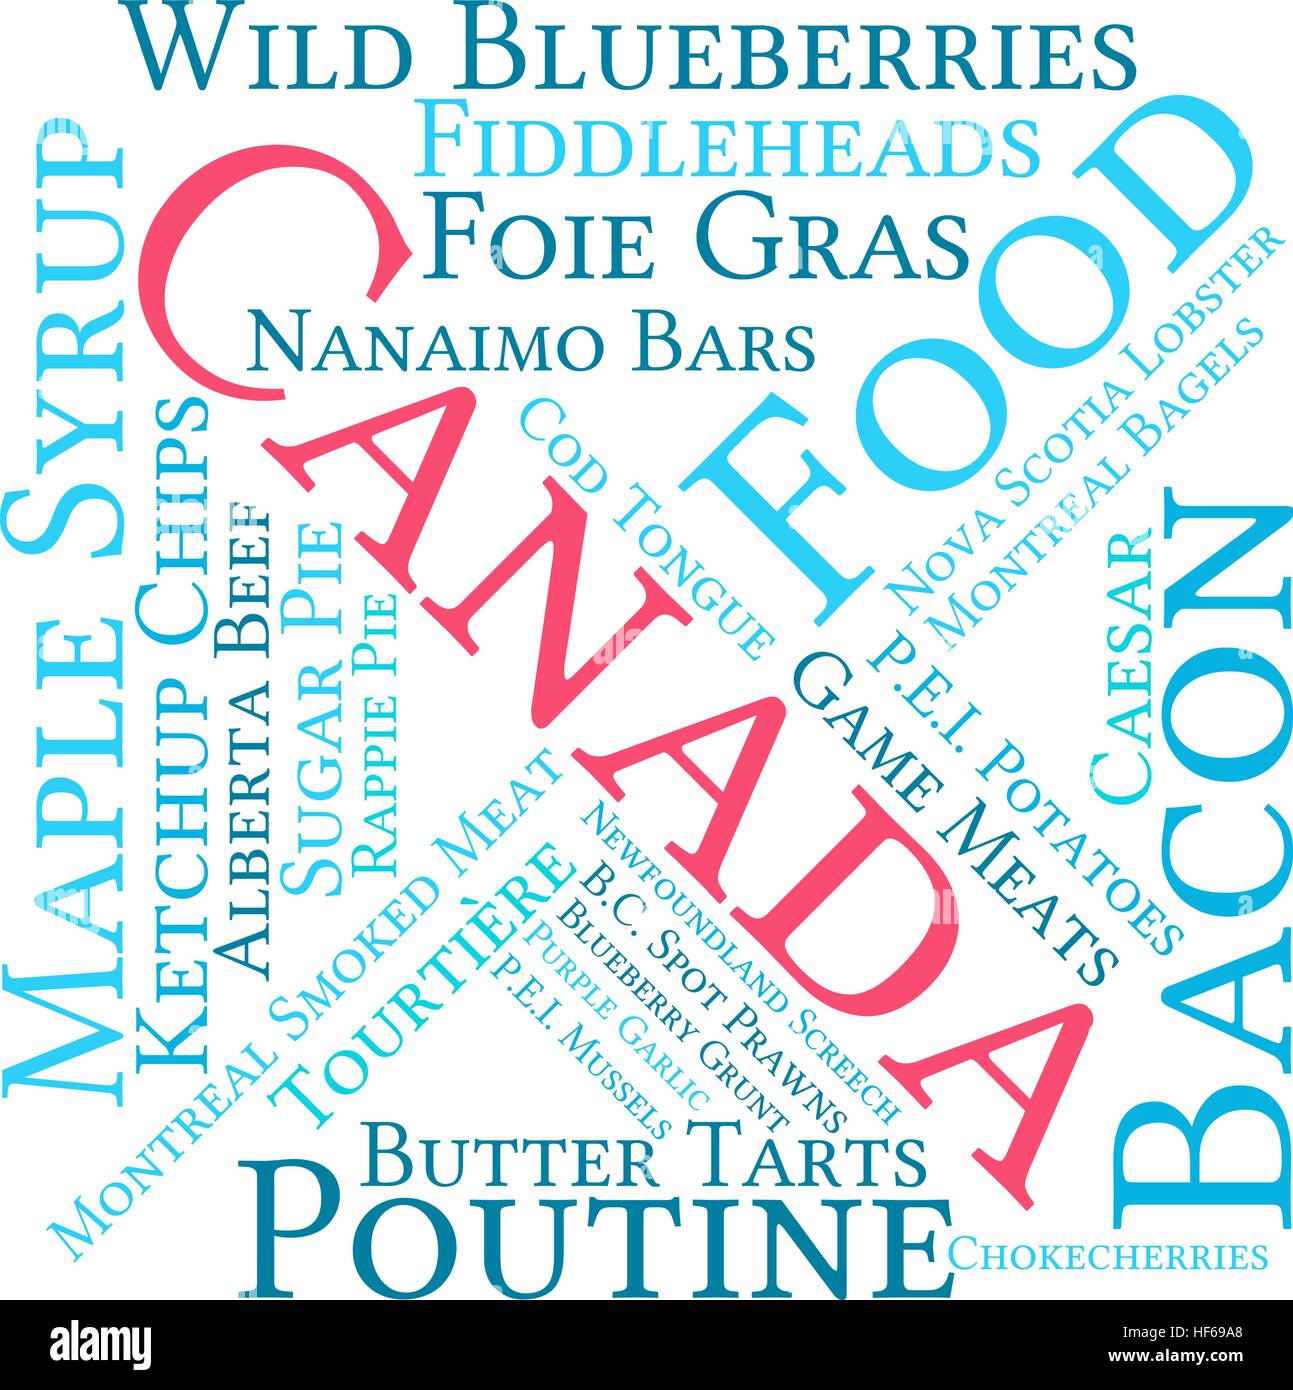 Canada Food word cloud on a white background. Stock Vector